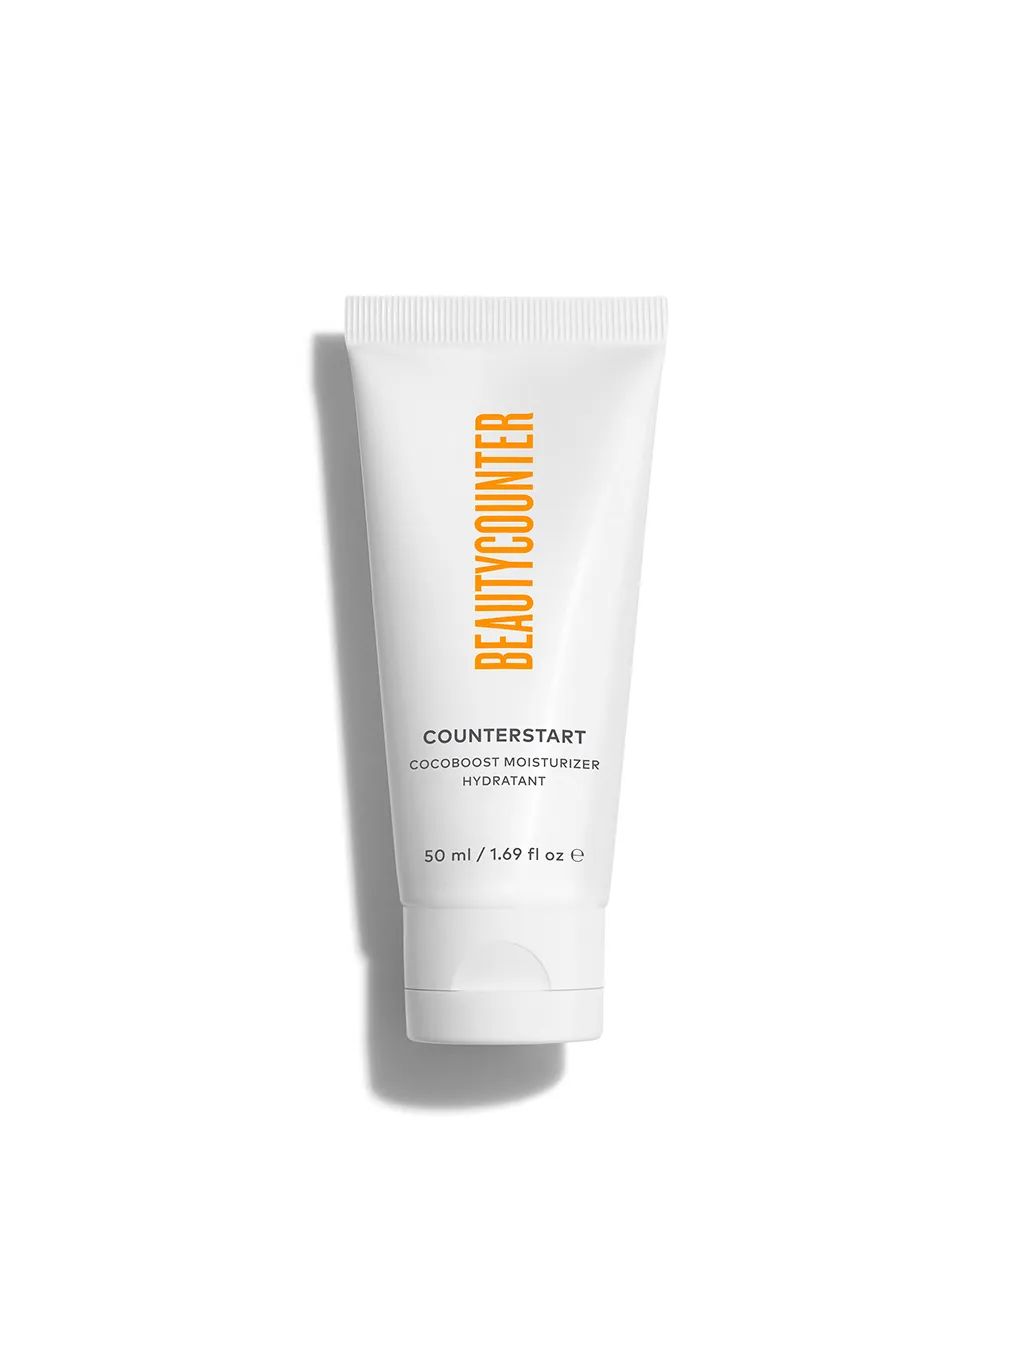 Counterstart Cocoboost Moisturizer - Beautycounter - Skin Care, Makeup, Bath and Body and more! | Beautycounter.com